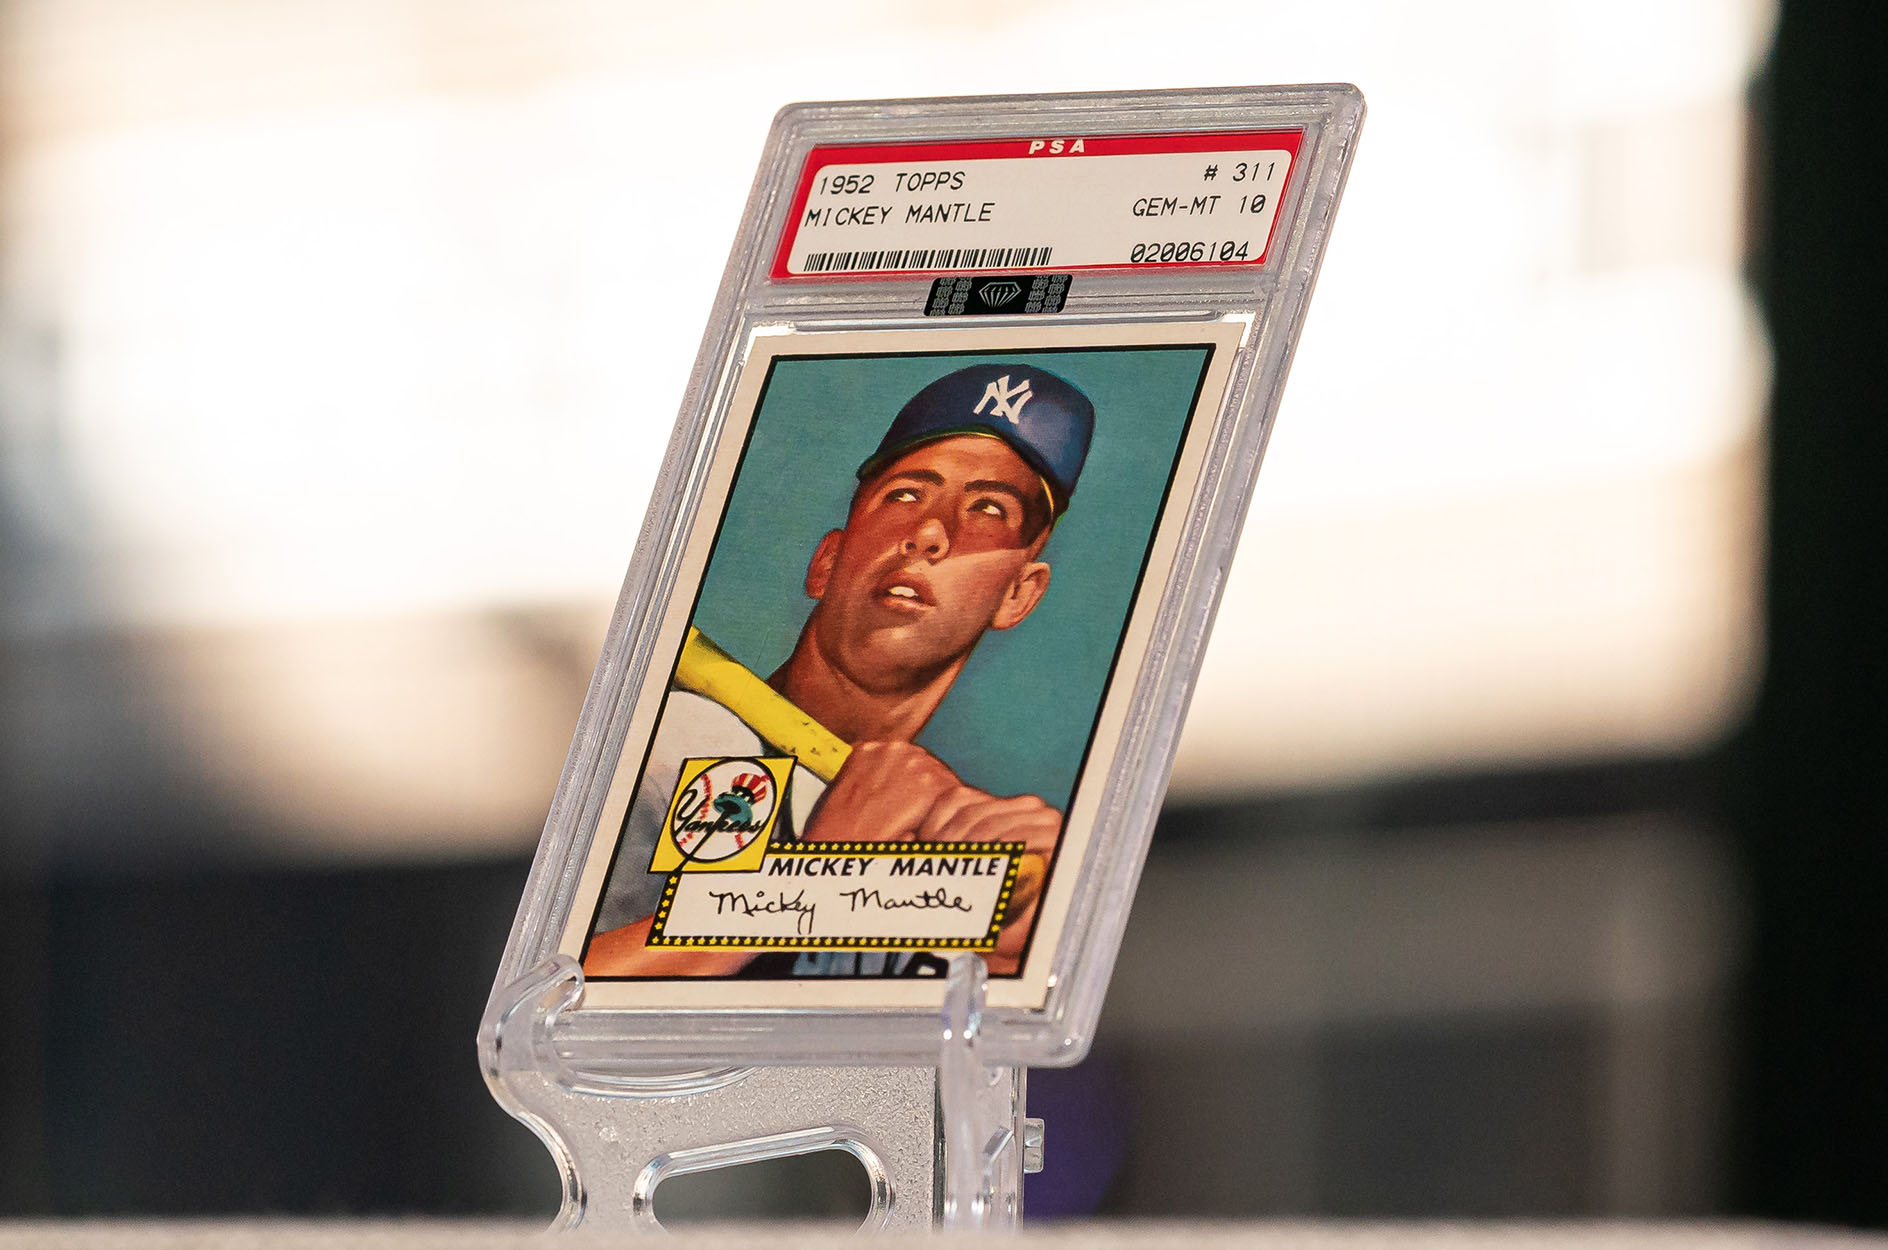 American Collectibles Giant Topps Launches Series 2 MLB NFT